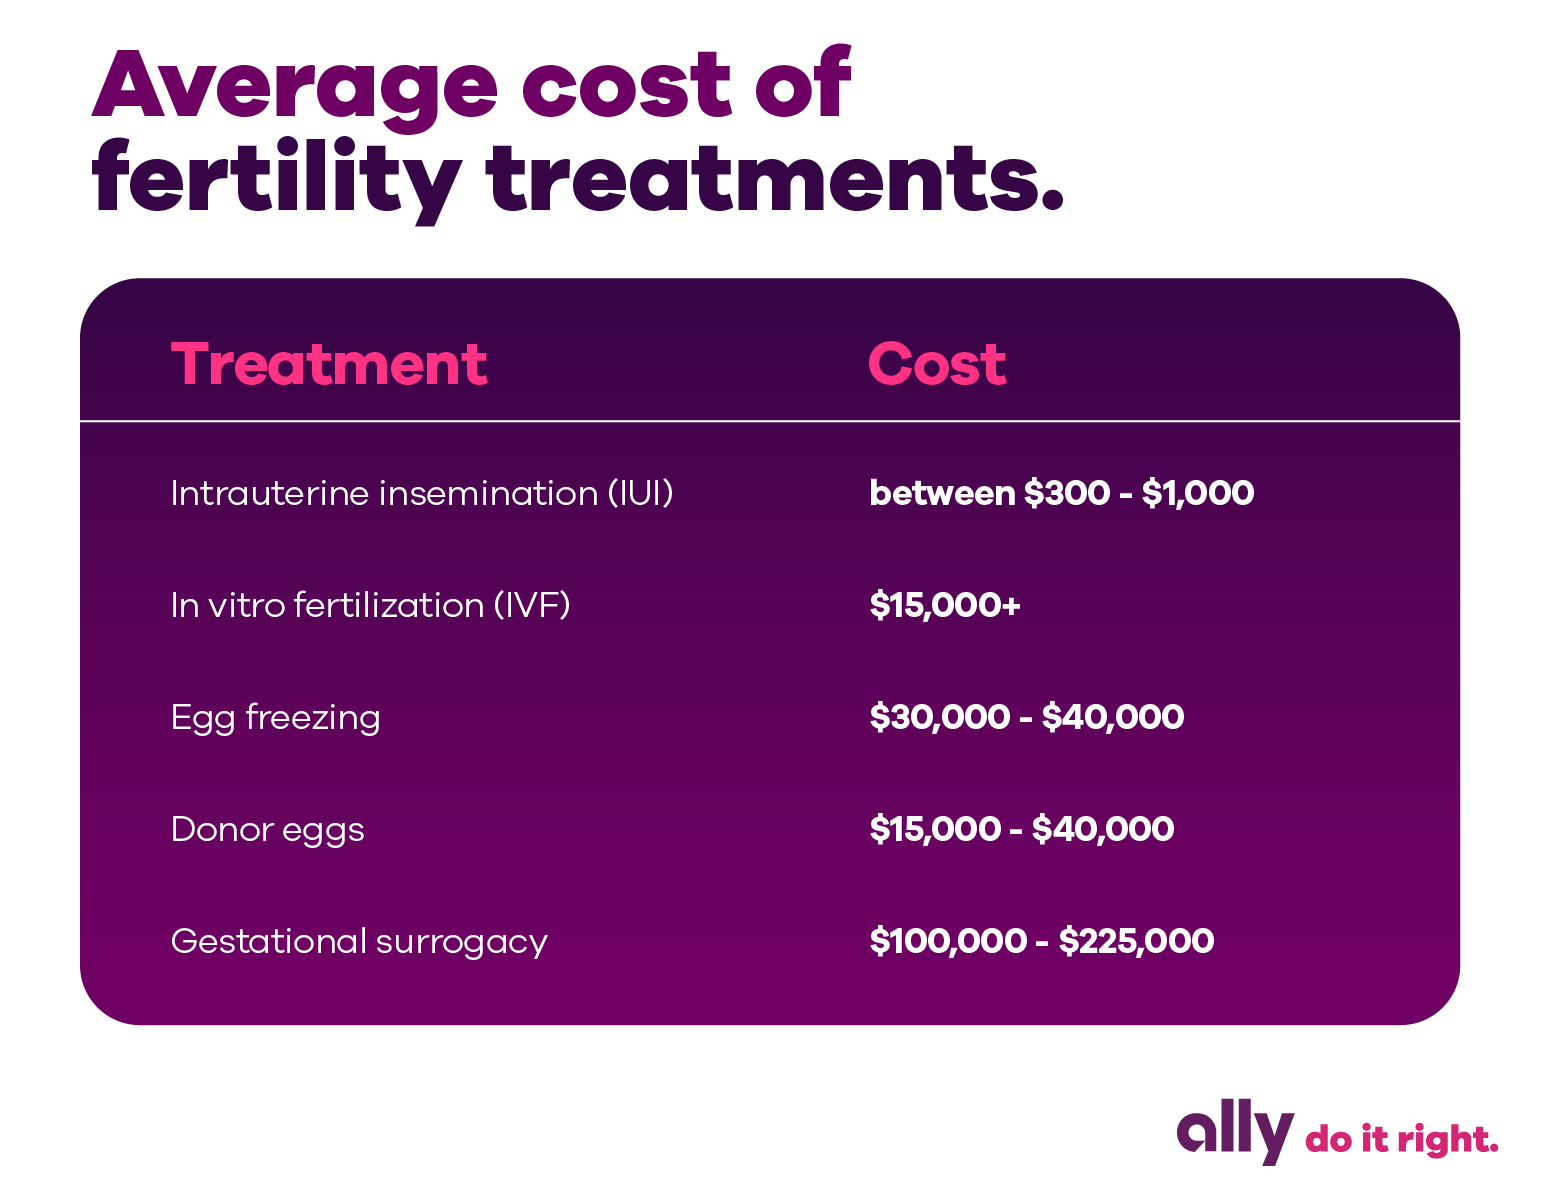 Graphic with the title, "Average cost of fertility treatments." Treatment: Intrauterine insemination (IUI) and average cost is between $300 to $1,000. Treatment: In vitro fertilization (IVF) and average cost is $15,000 or more. Treatment: Egg freezing and average cost is between $30,000 to $40,000. Treatment: Donor eggs and average cost is between $15,000 to $40,000. Treatment: Gestational surrogacy and average cost is between $100,000 and $225,000.